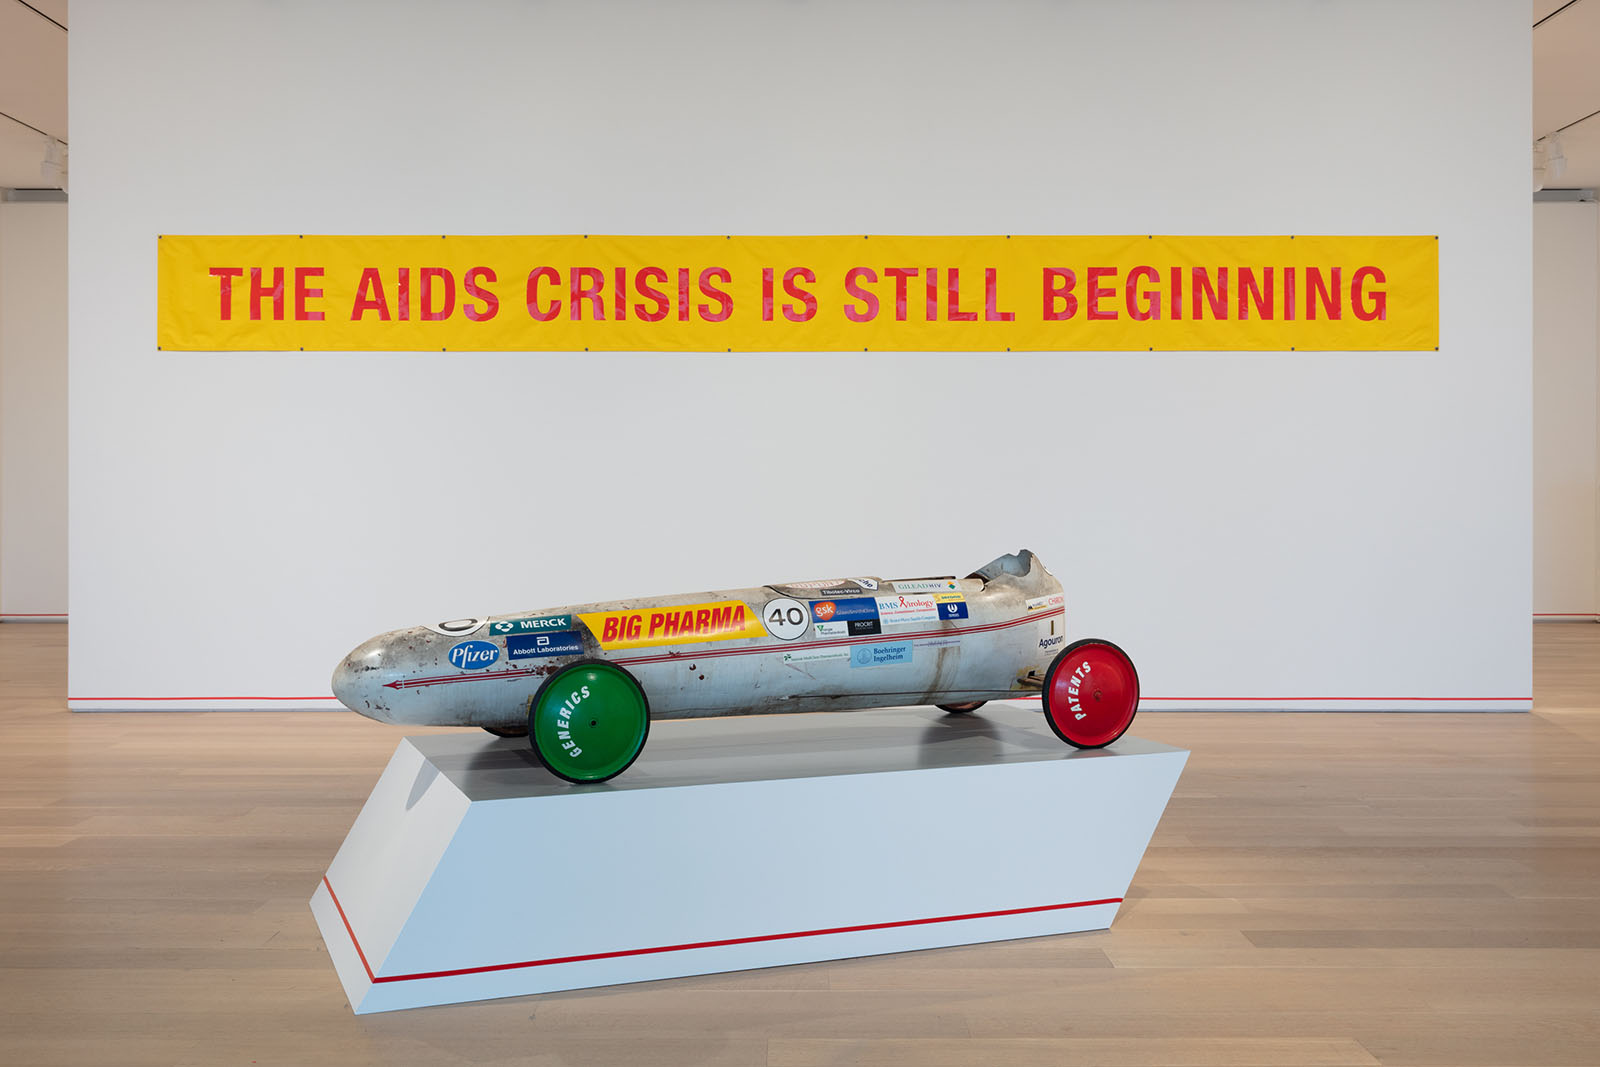 A gallery installation with a sculpture and on the back wall a yellow poster with red text that says “The AIDS Crisis is Still Beginning”